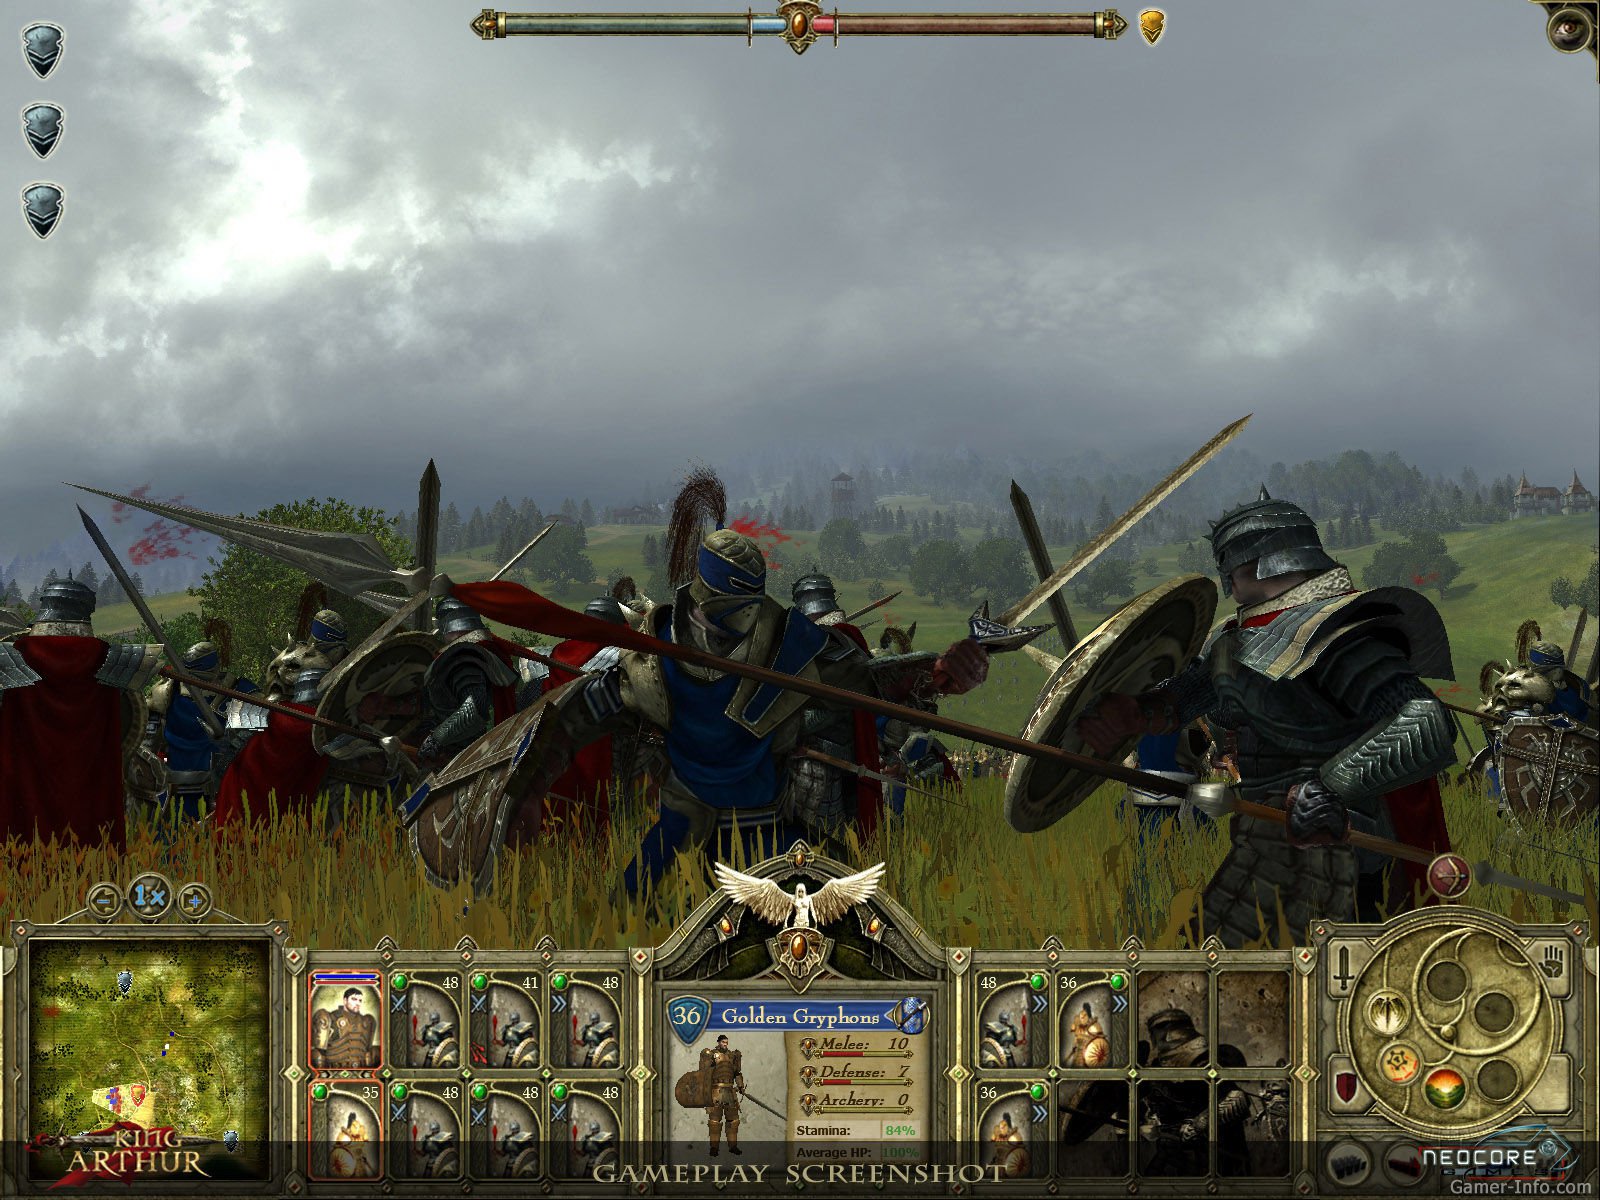 King arthur игра. King Arthur: the role-playing Wargame.